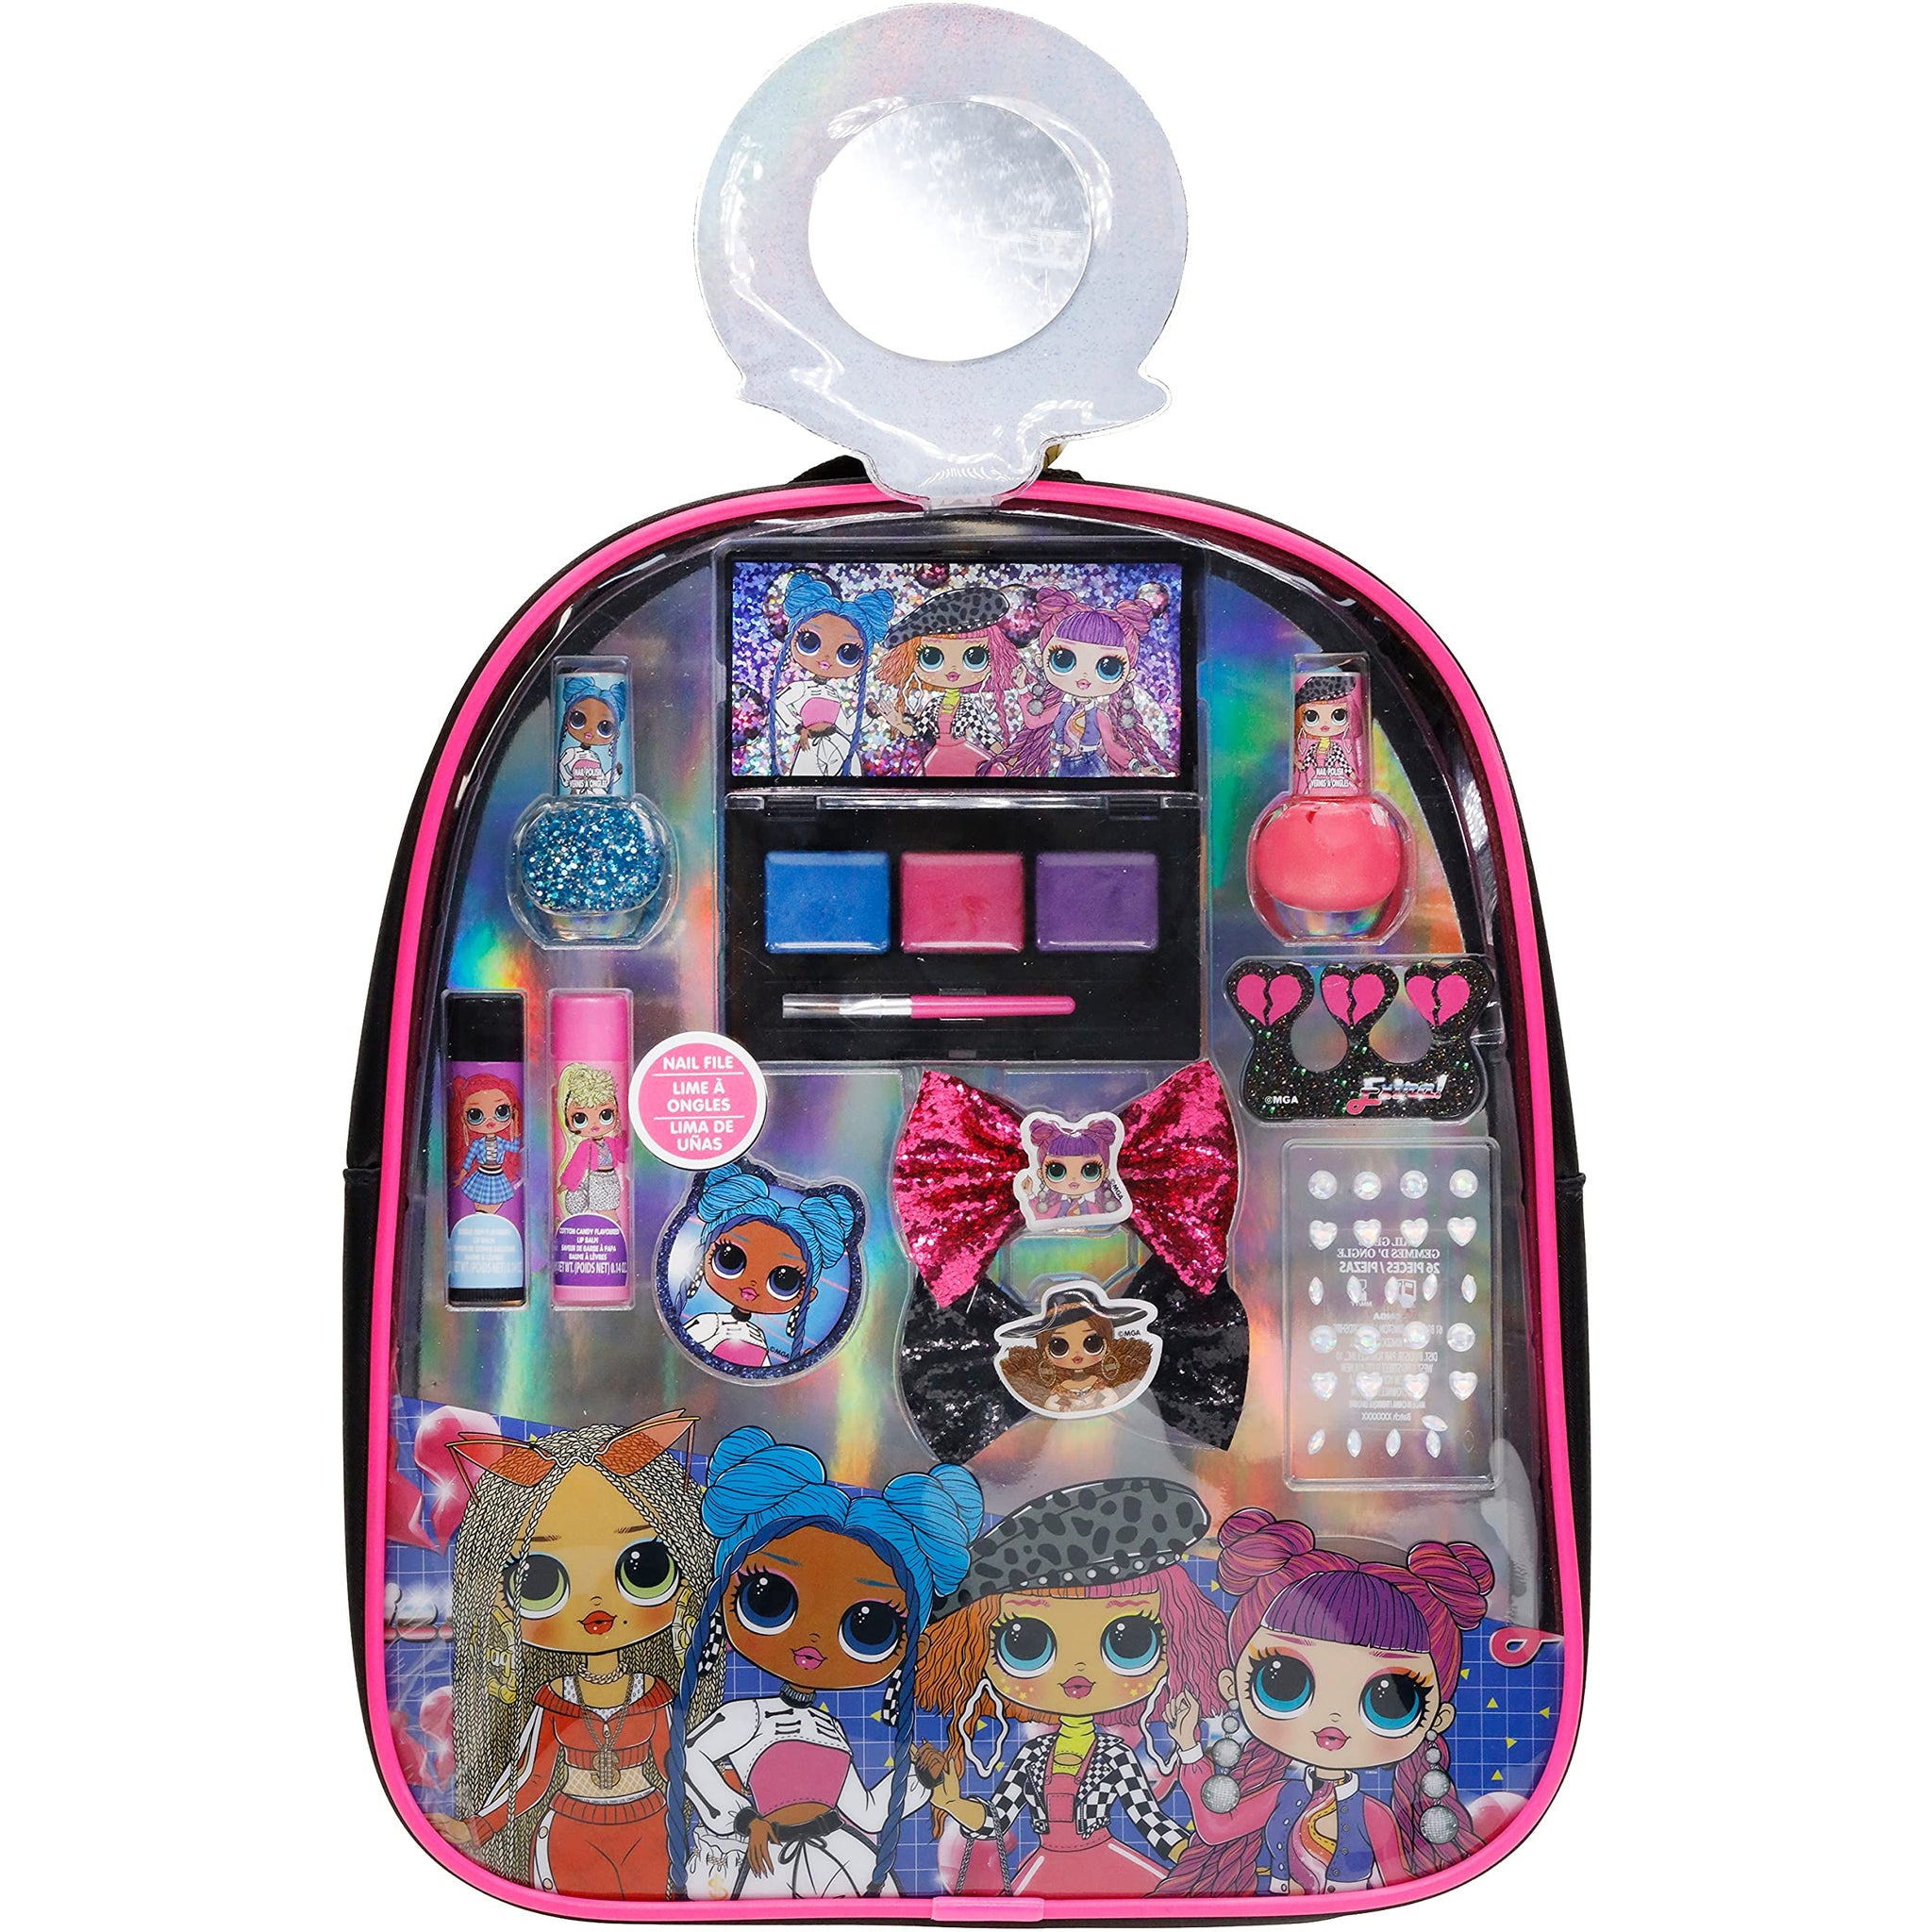 L.O.L Surprise! Townley Girl Backpack Cosmetic Makeup Set 10 Pieces, Including Lip Gloss, Nail Polish, Scrunchy, Mirror and Surprise Keychain, Ages 5+